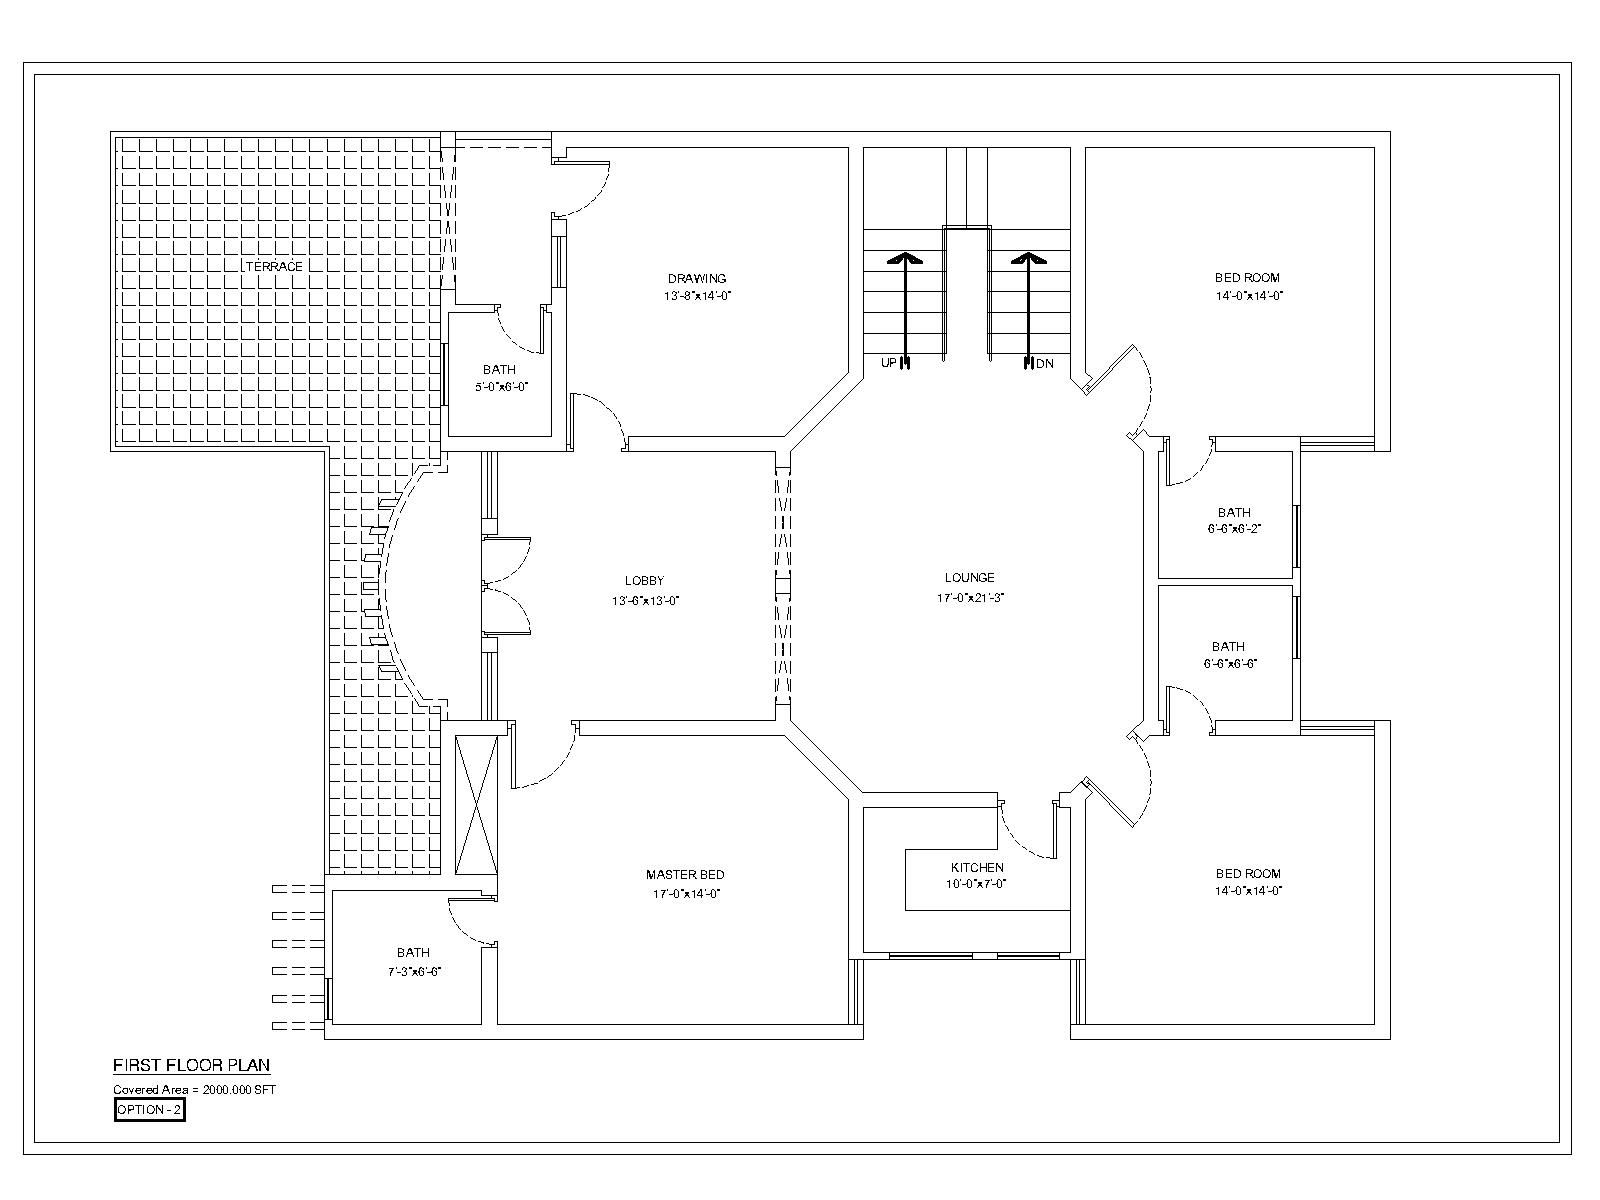 Rectangular Shape 2 Bedroom House Design Layout Plan .dwg_2 | Thousands of  free AutoCAD drawings